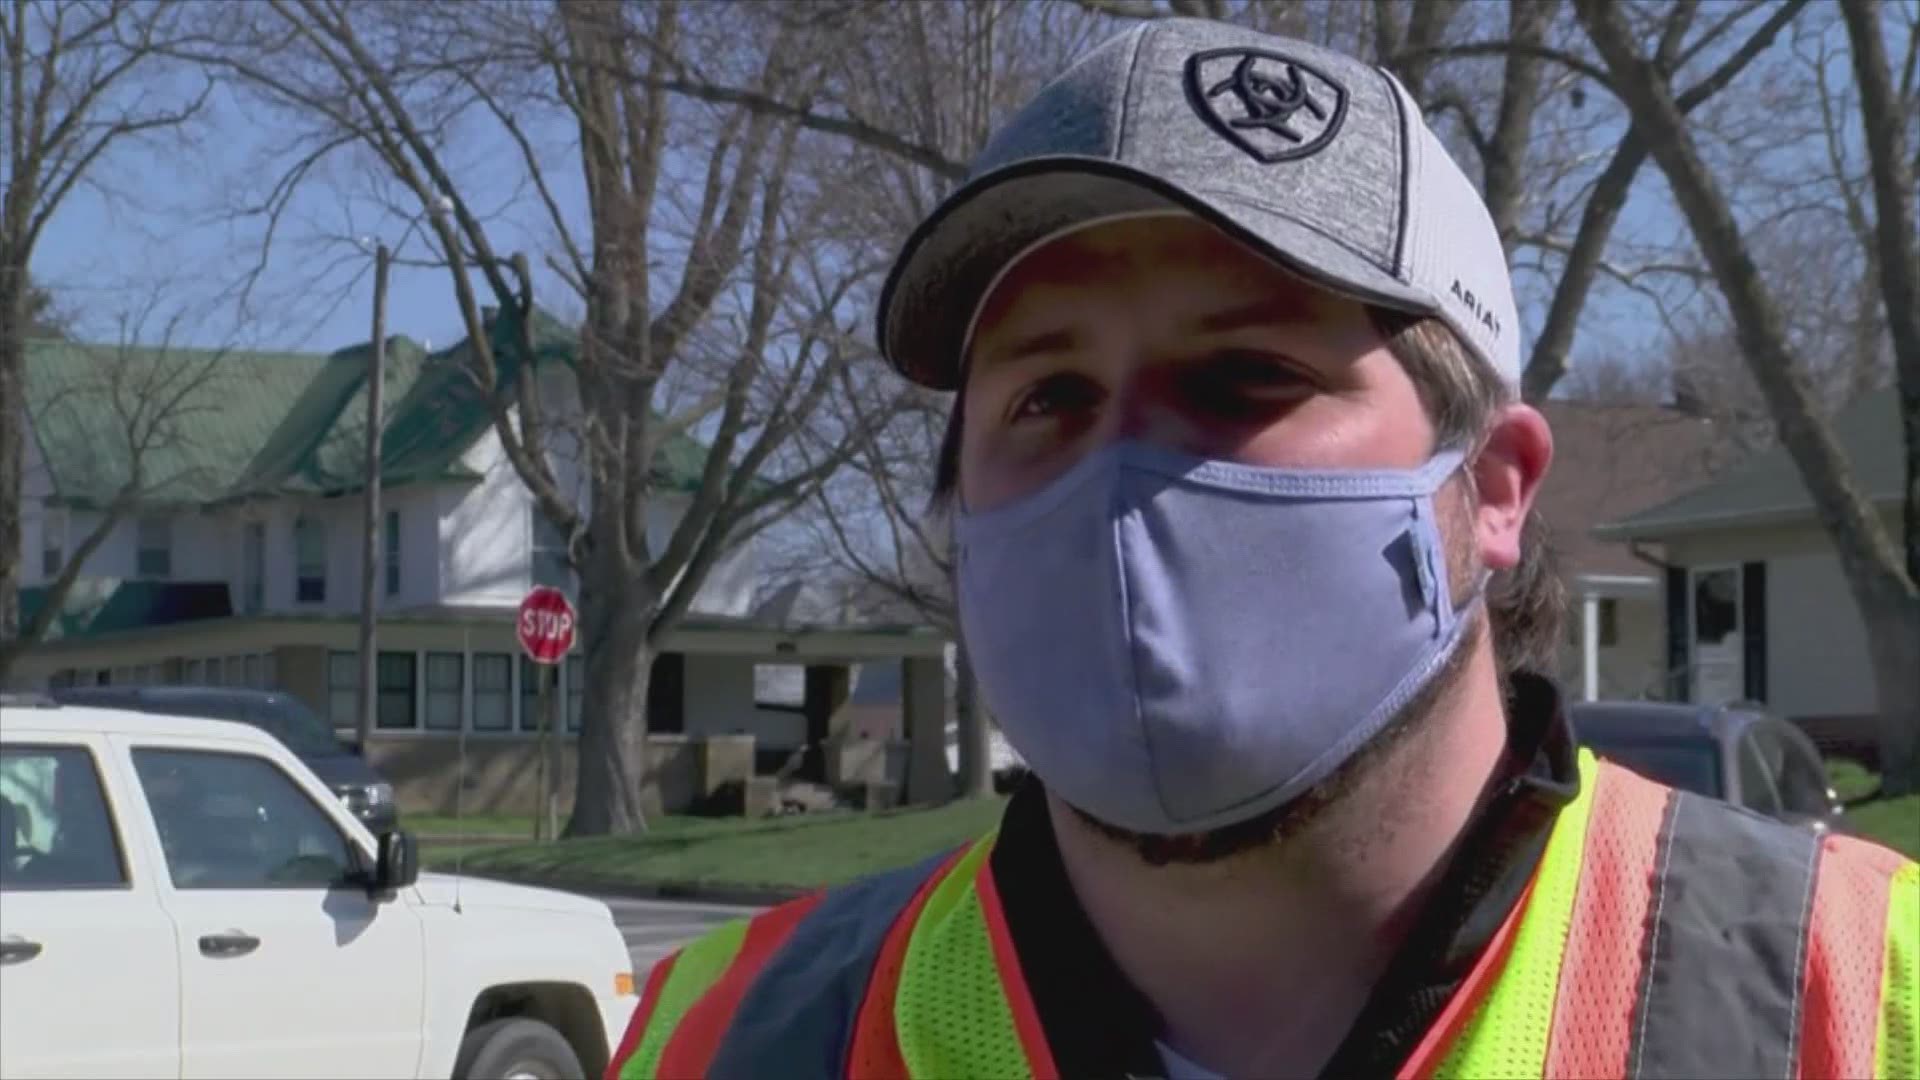 A small committee came together to buy and distribute 6,000 masks at the Fareway parking lot in Perry on Sunday.